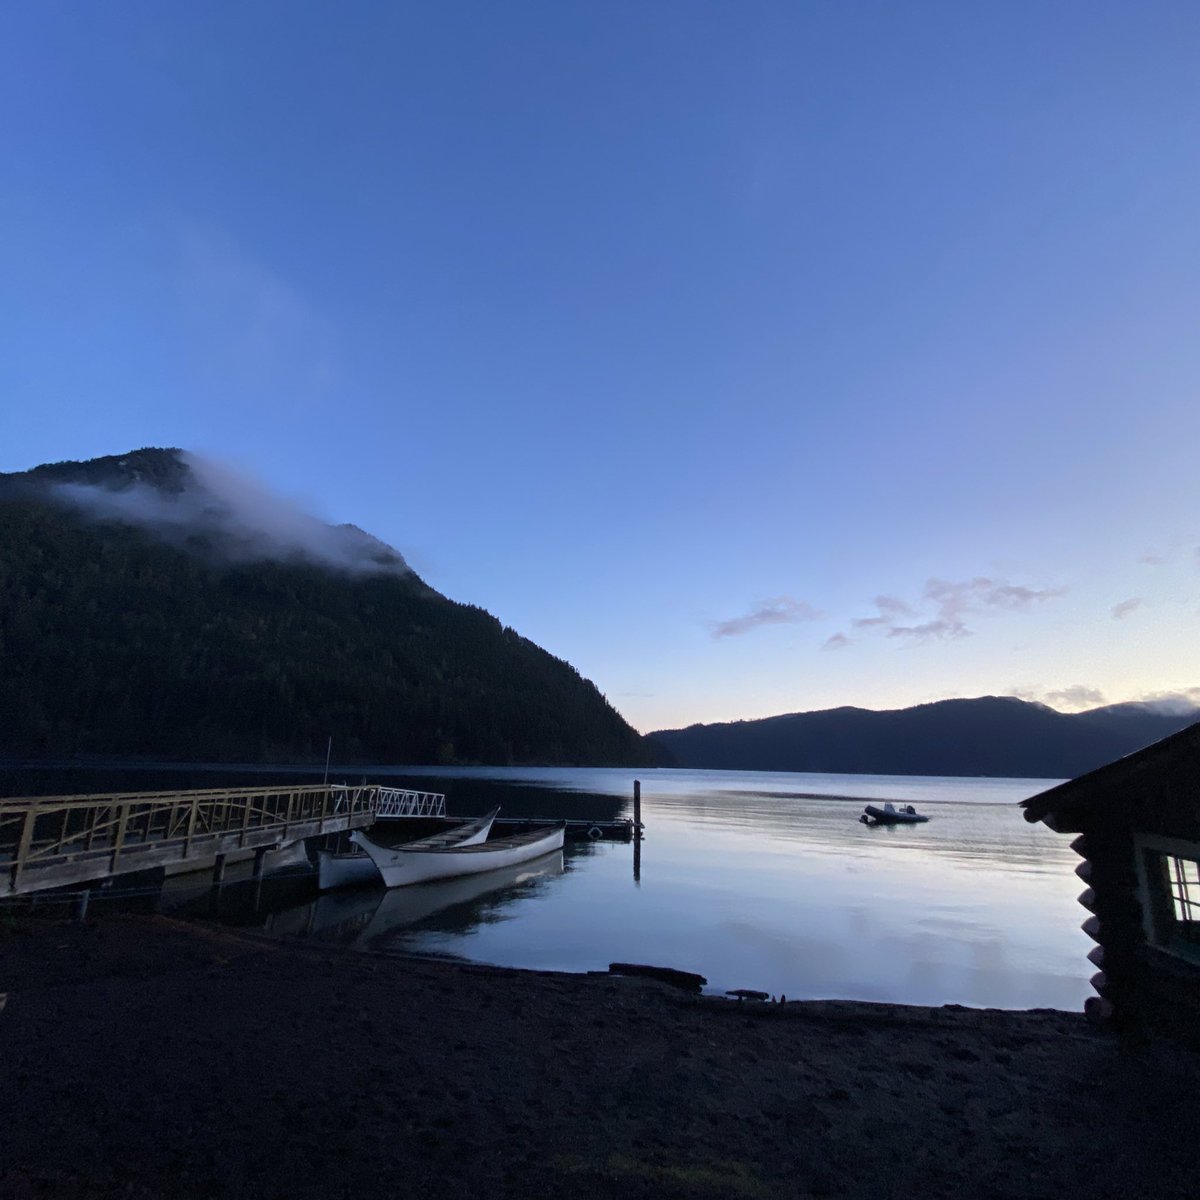 Good morning ☀️ spent the week at the Olympic Peninsula with my youngest daughter’s class. The weather was beautiful at NatureBridge! This is Crescent Lake at daybreak…